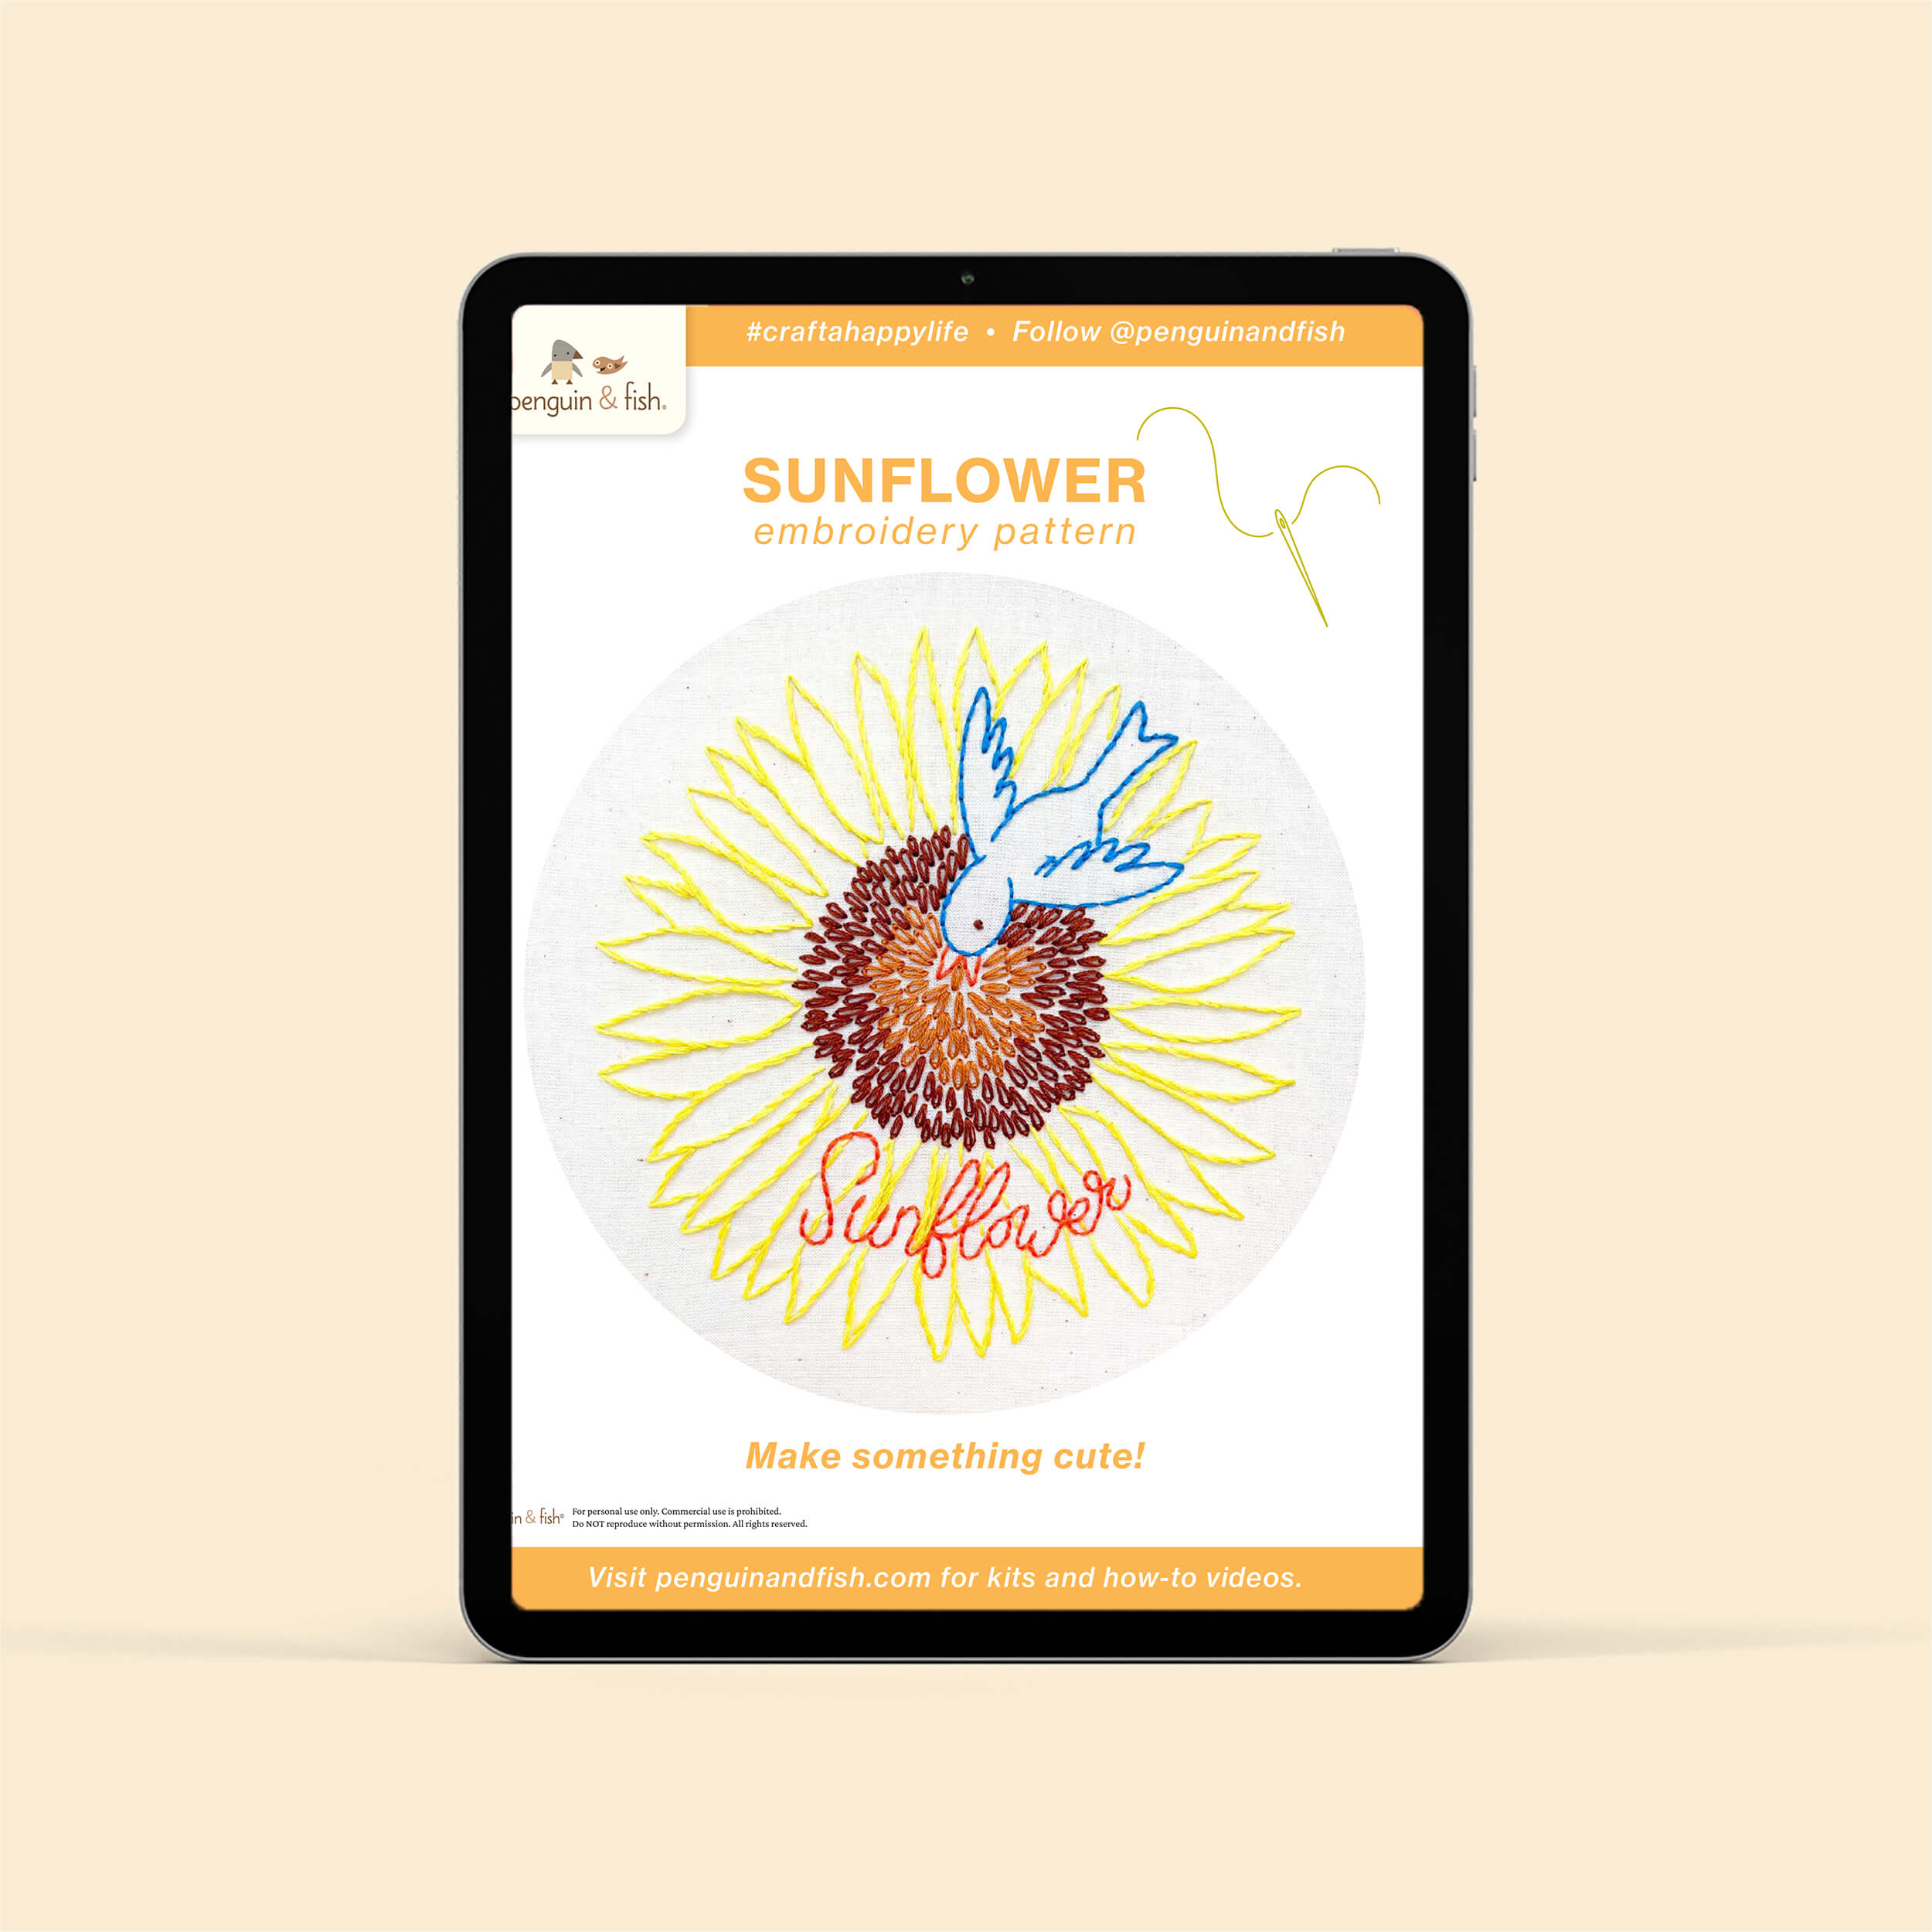 Sunflower PDF printable pattern shown on a tablet